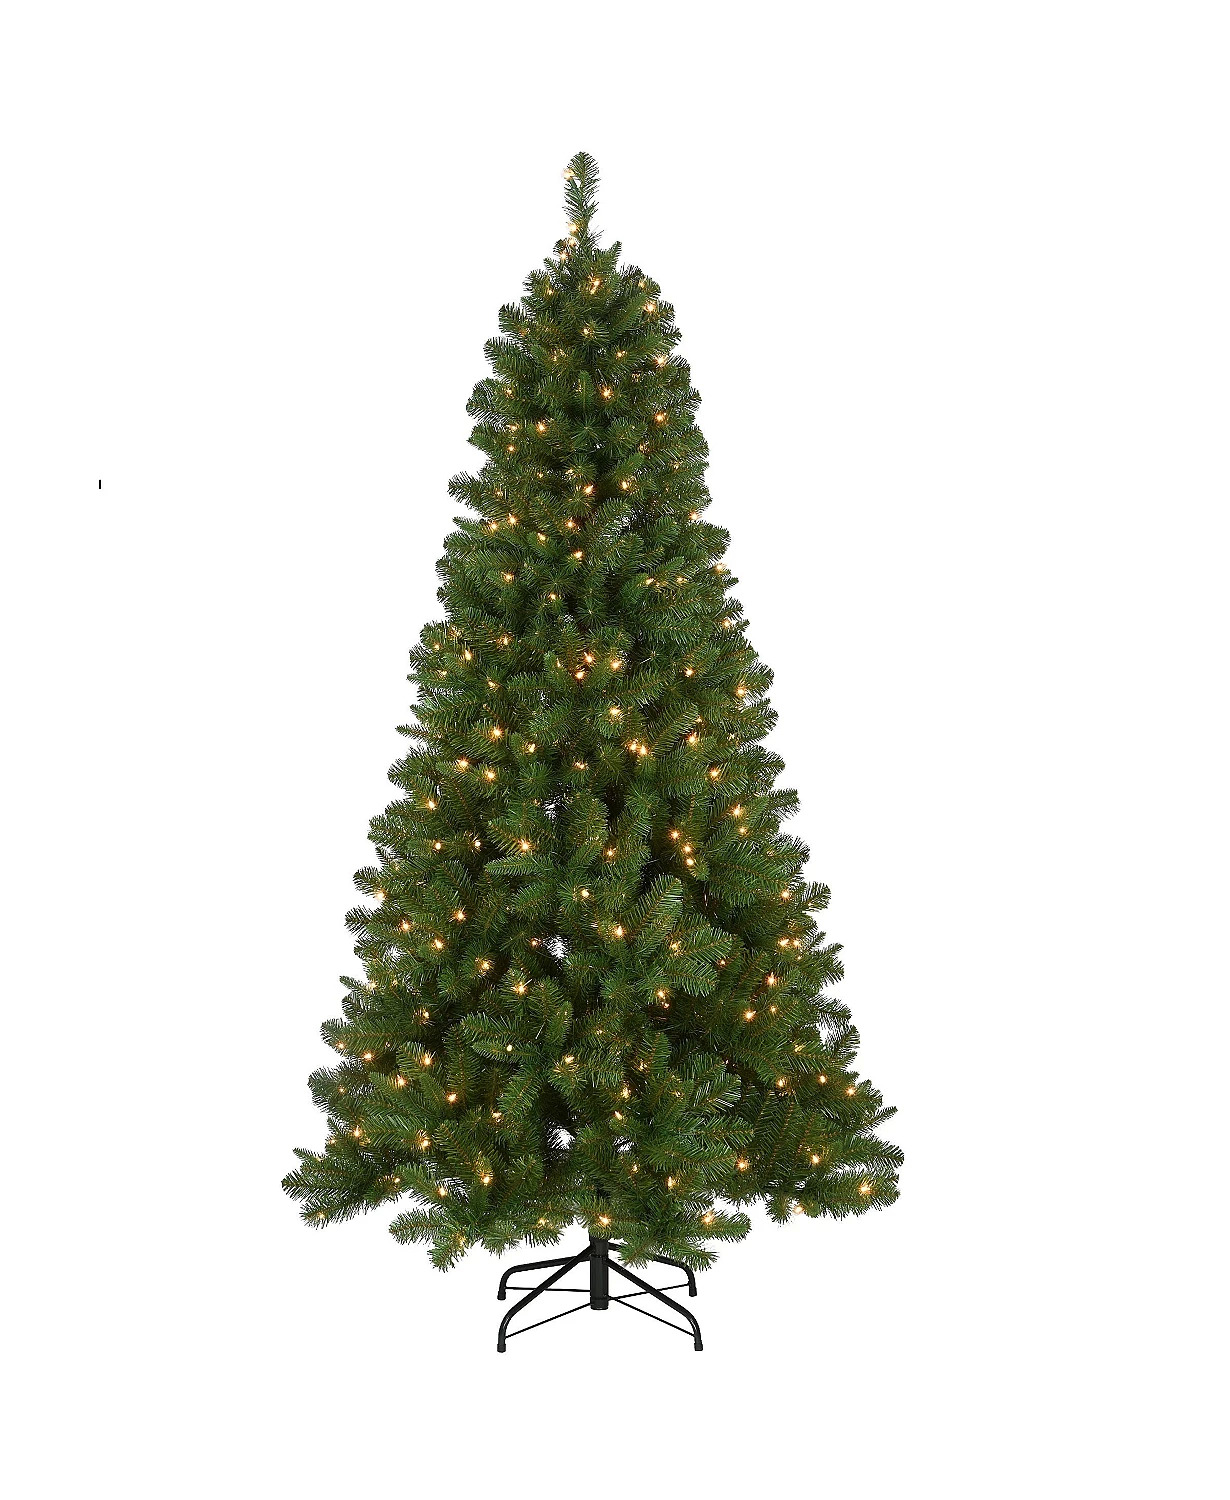 6.5-Ft. National Tree Company Pre-lit Artificial Mixed Pine Tree $100 + SD Cashback + Free Shipping